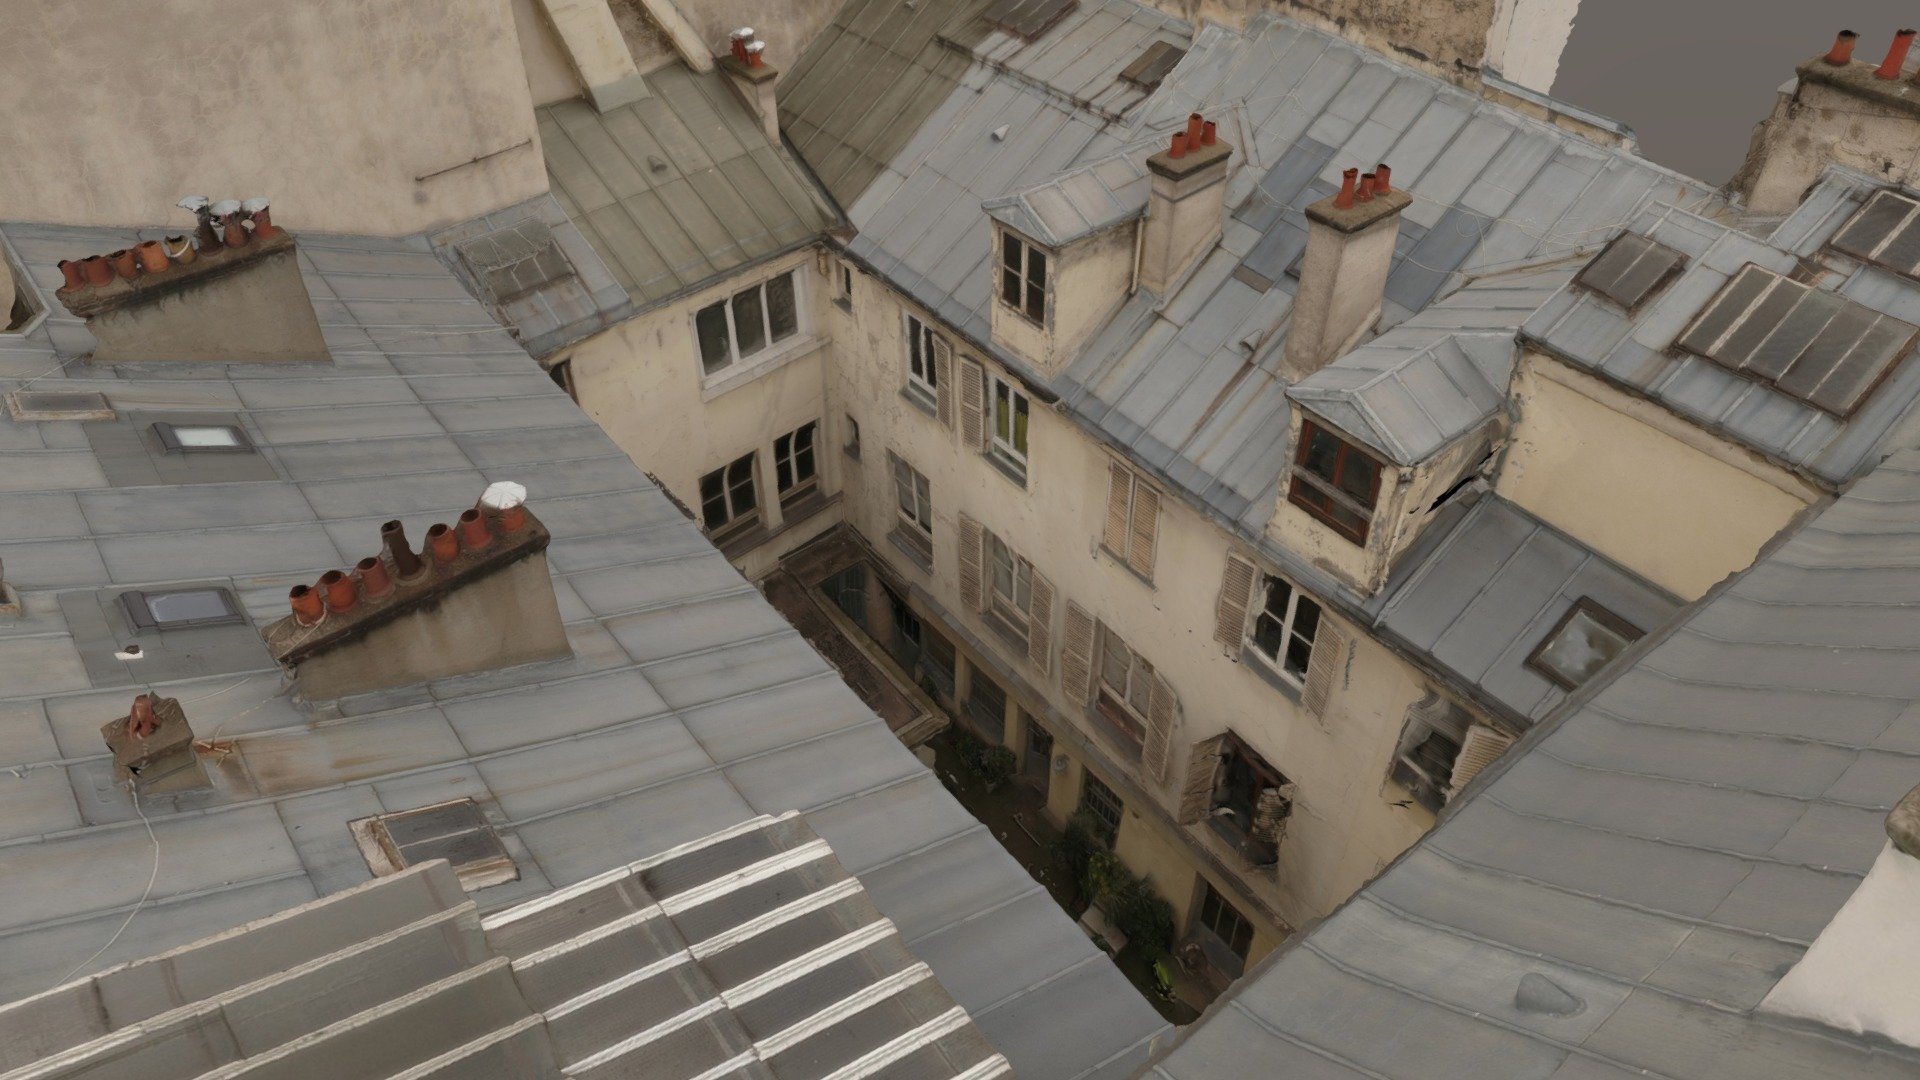 We carried out the inspection by drone of the facades and roofs of a courtyard in Paris 3d model